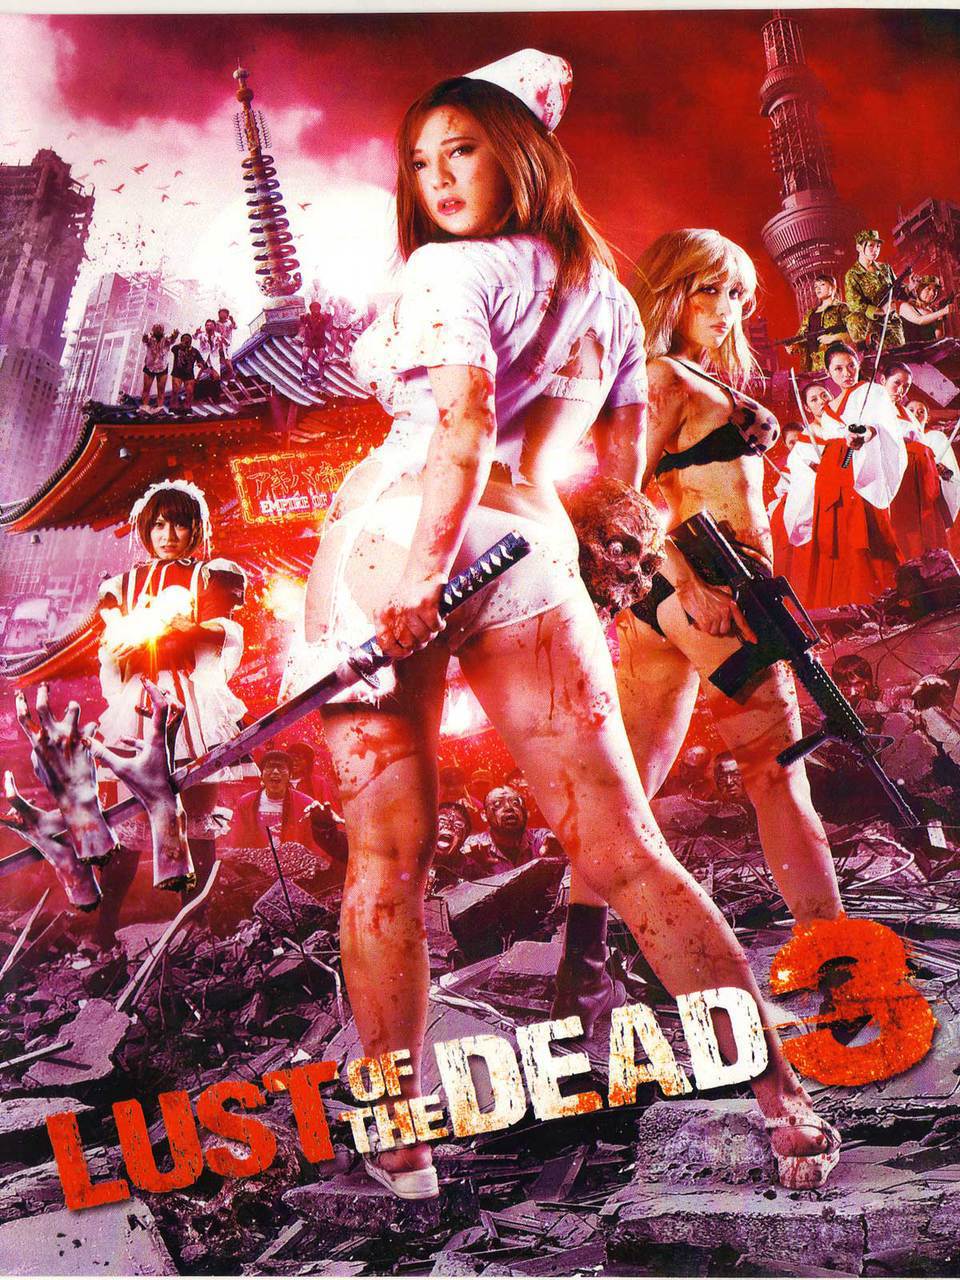 Lust of the Dead 3 DVD